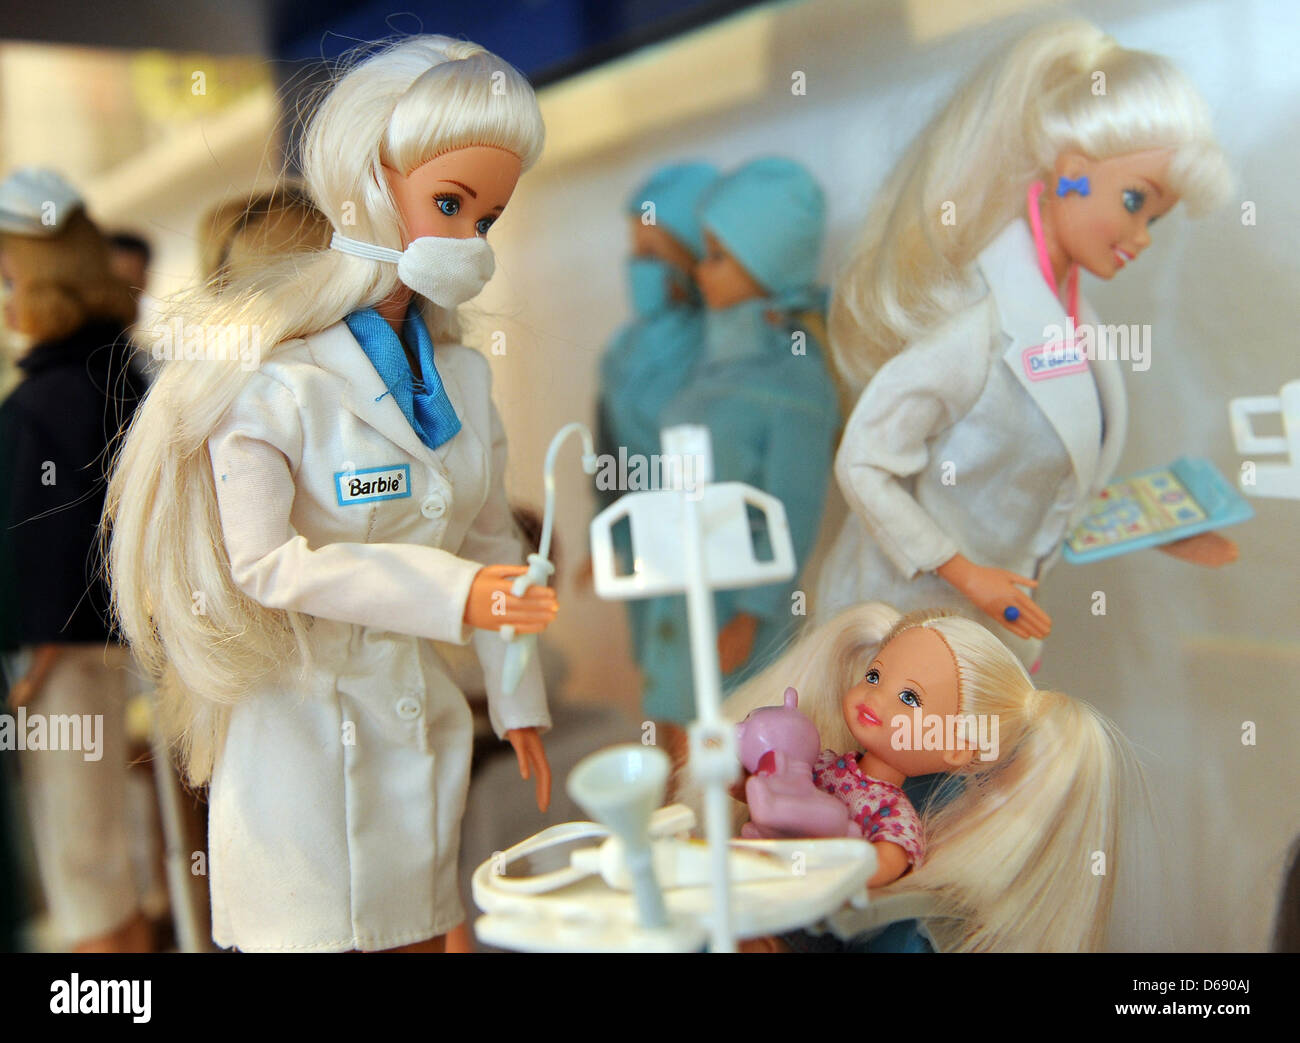 Dentist Barbie is on display at the museum 'Alte Burg' in Wittenberge, 26 January 2012. The tavelling exhibition 'Busy Girl - Barbie's Career' documents women's history of the last 50